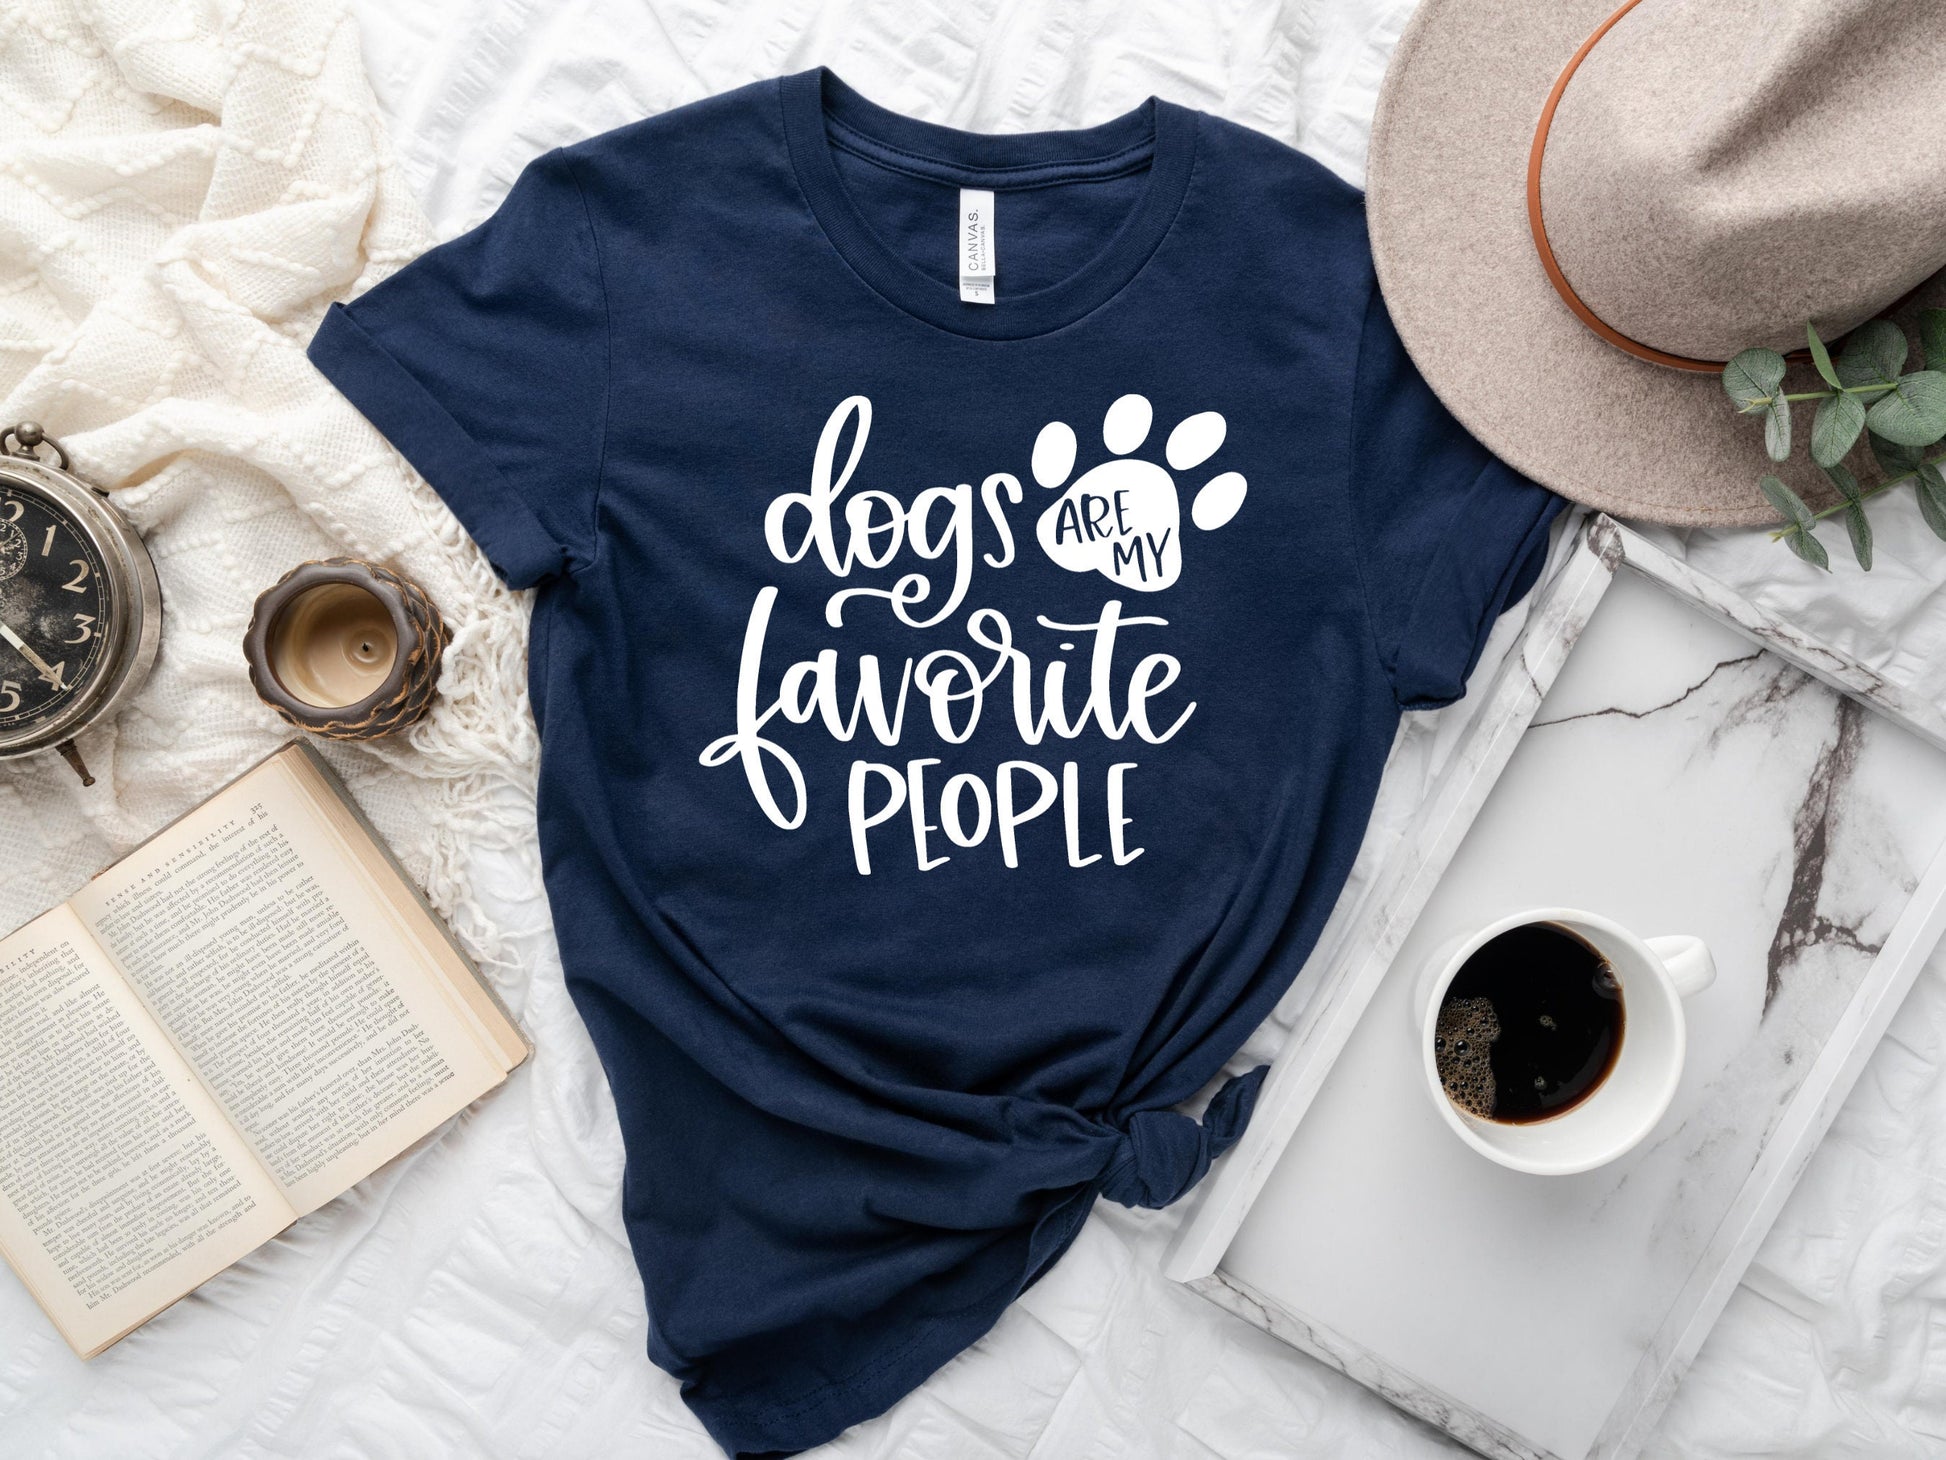 Dogs Are My Favorite People Shirt, Dog Lover Shirt, Dog Shirts, Dog Lover Gift, Dogs Are My Favorite, - Mardonyx T-Shirt Navy / S